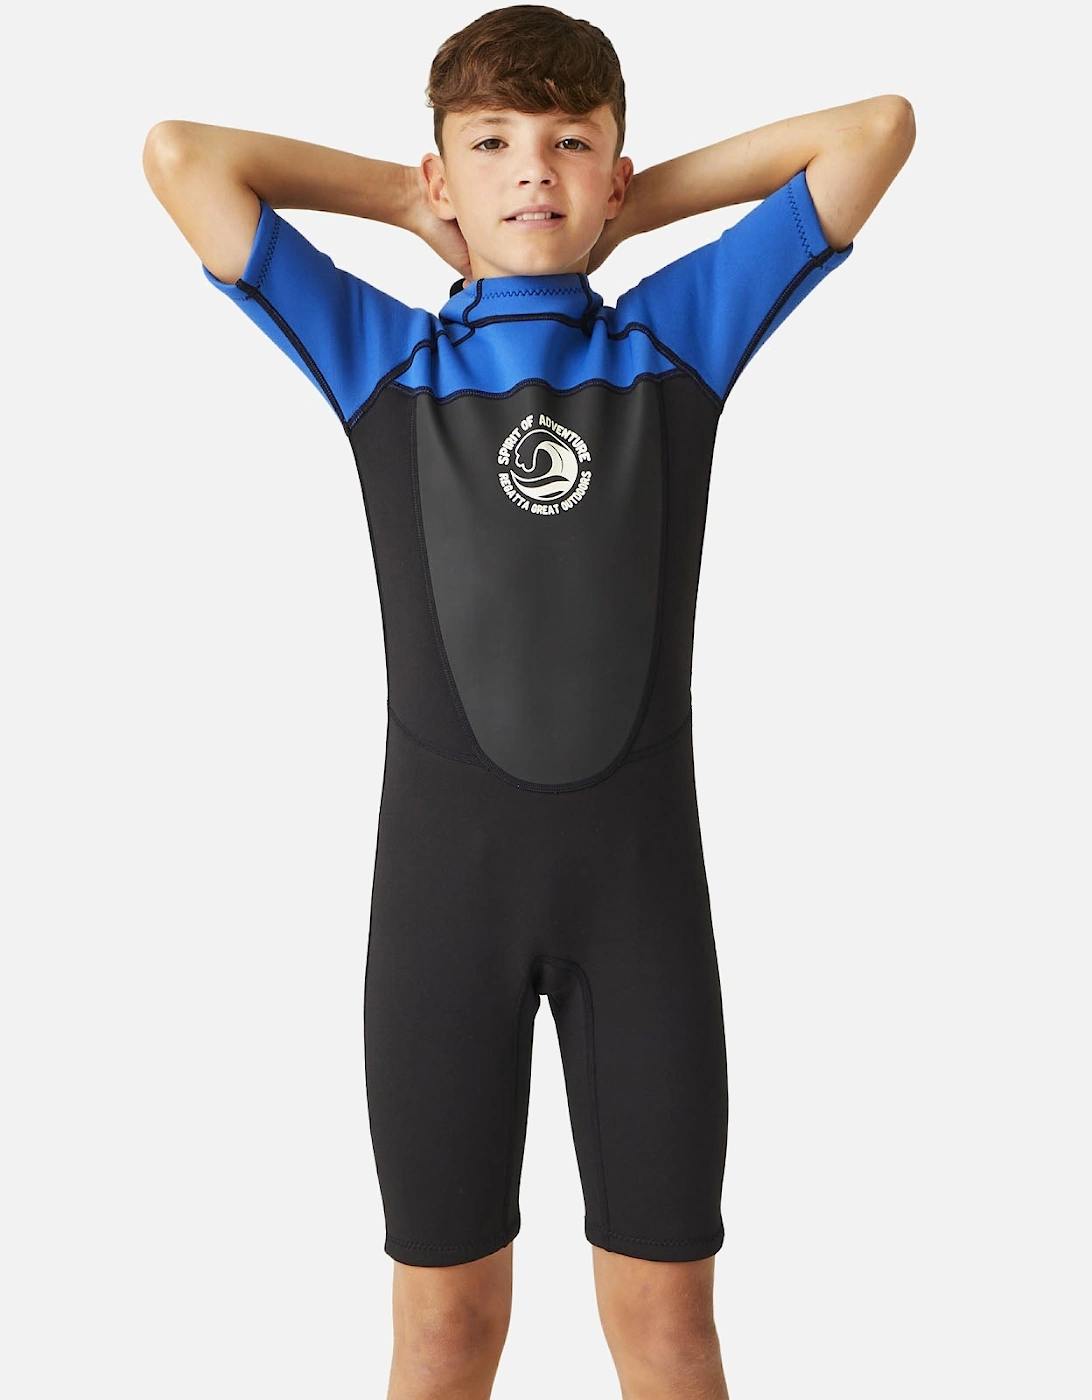 Kids Shorty Surfing Wetsuit, 21 of 20